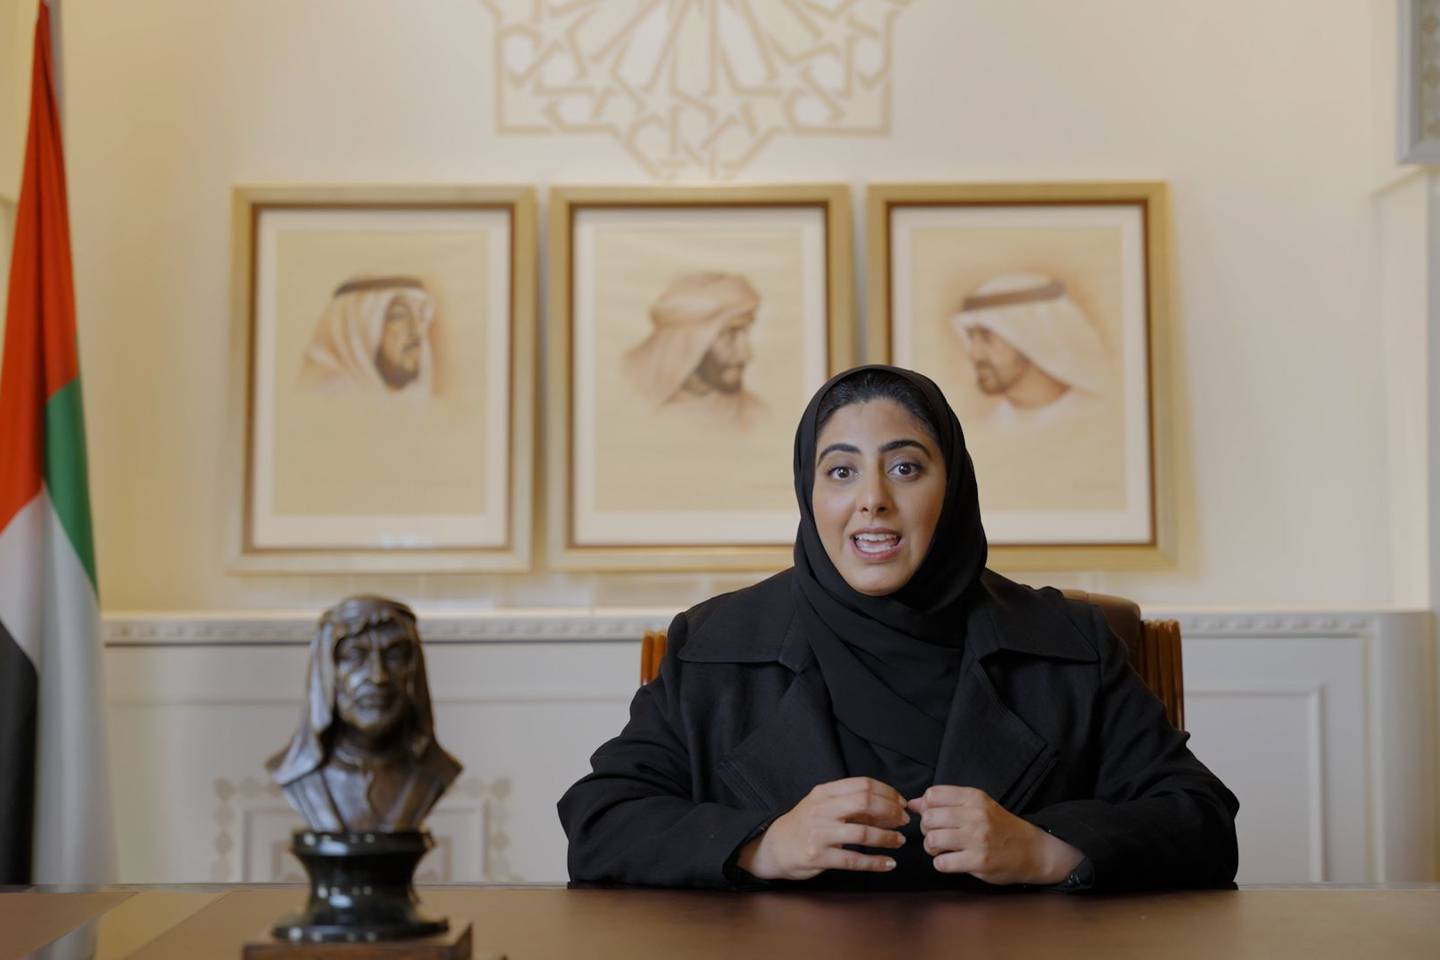 Sheikha Shamma gives speech on sustainability in first public appearance